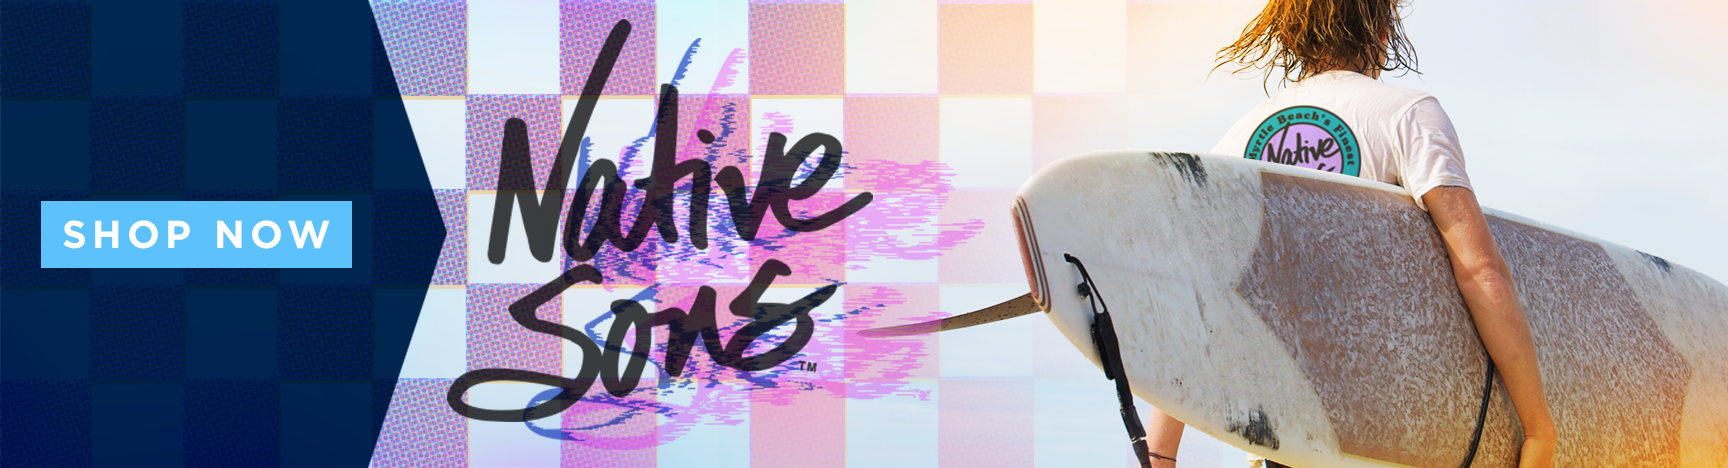 Native Sons - Main page Shop Banner.png